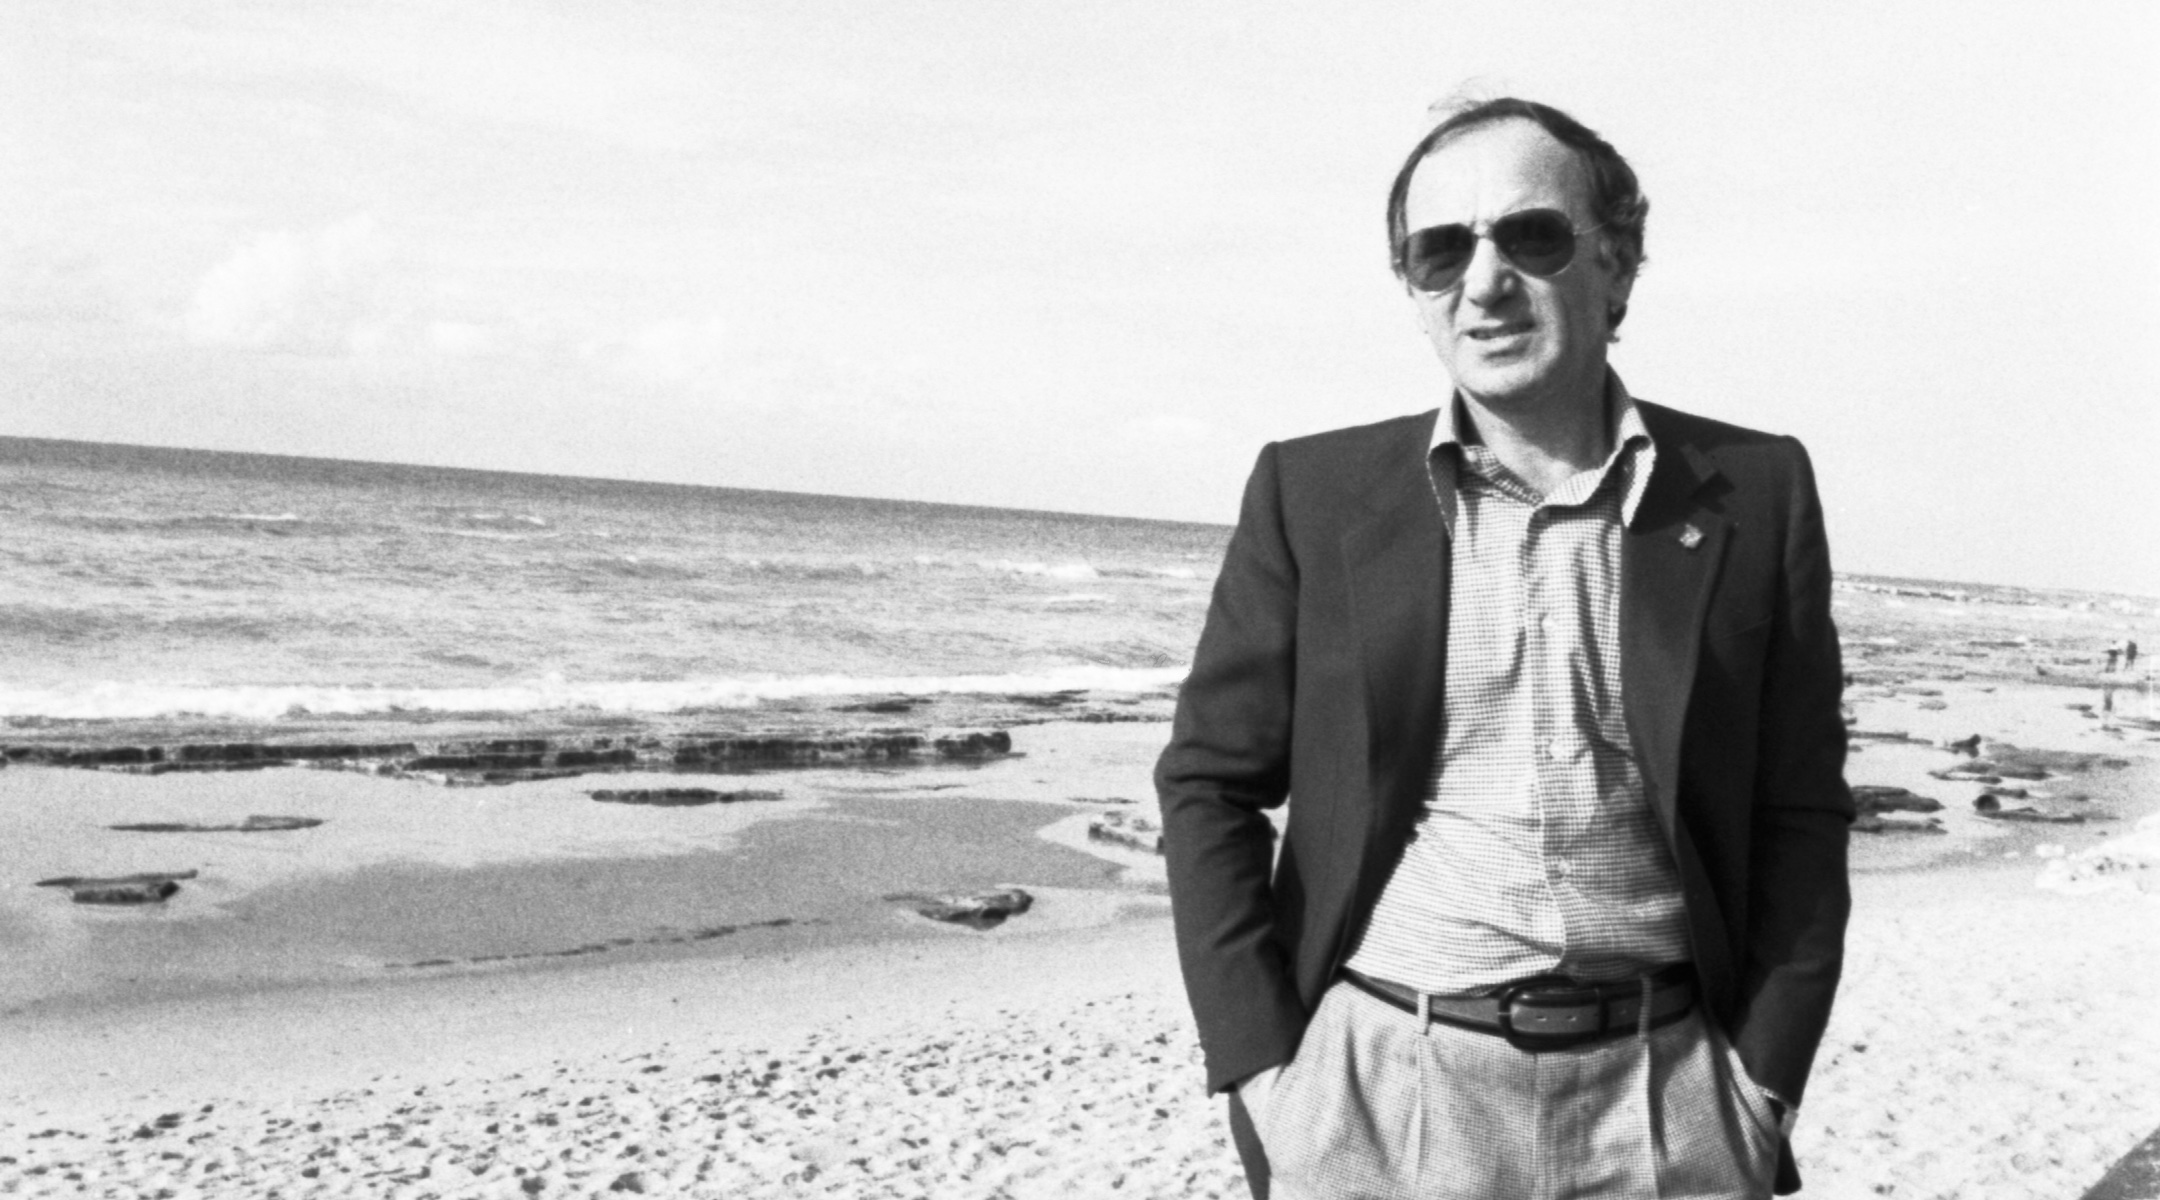 Charles Aznavour on a beach in Jaffa, Israel, January 1977. (William Karel/Gamma-Rapho via Getty Images)